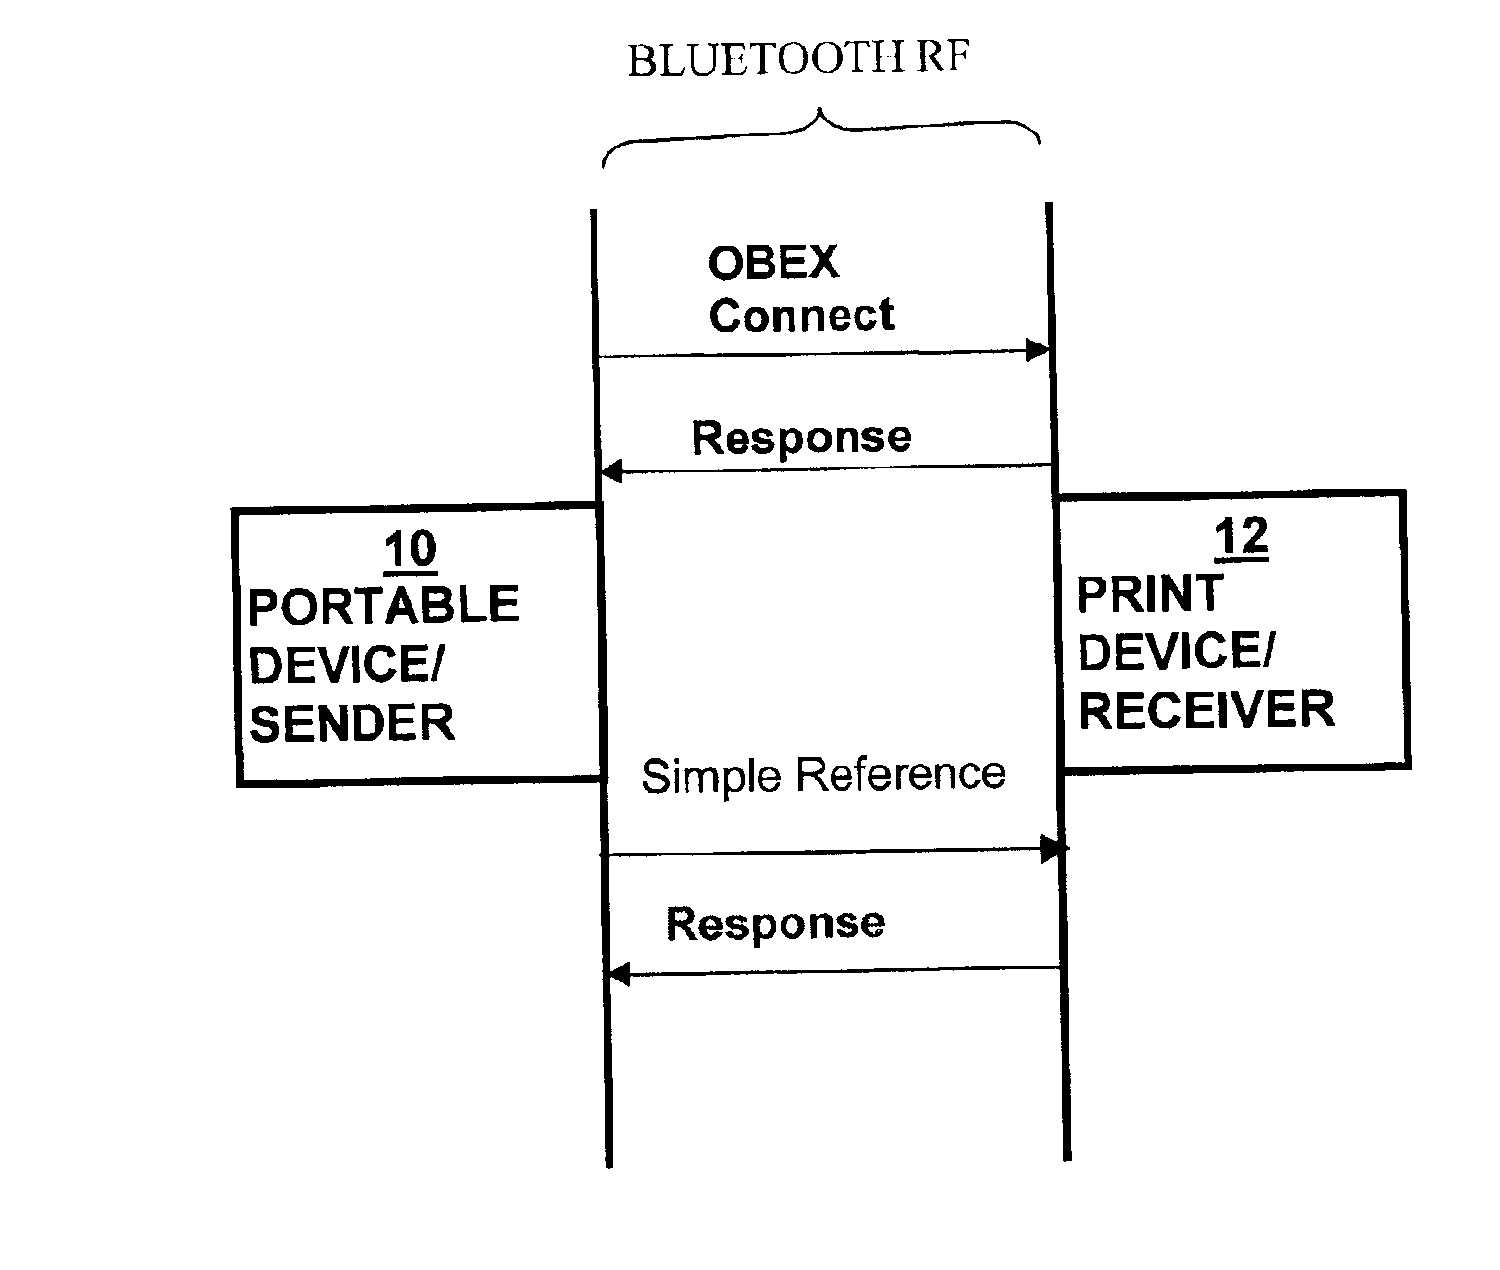 Portable wireless device and print device print by reference protocol